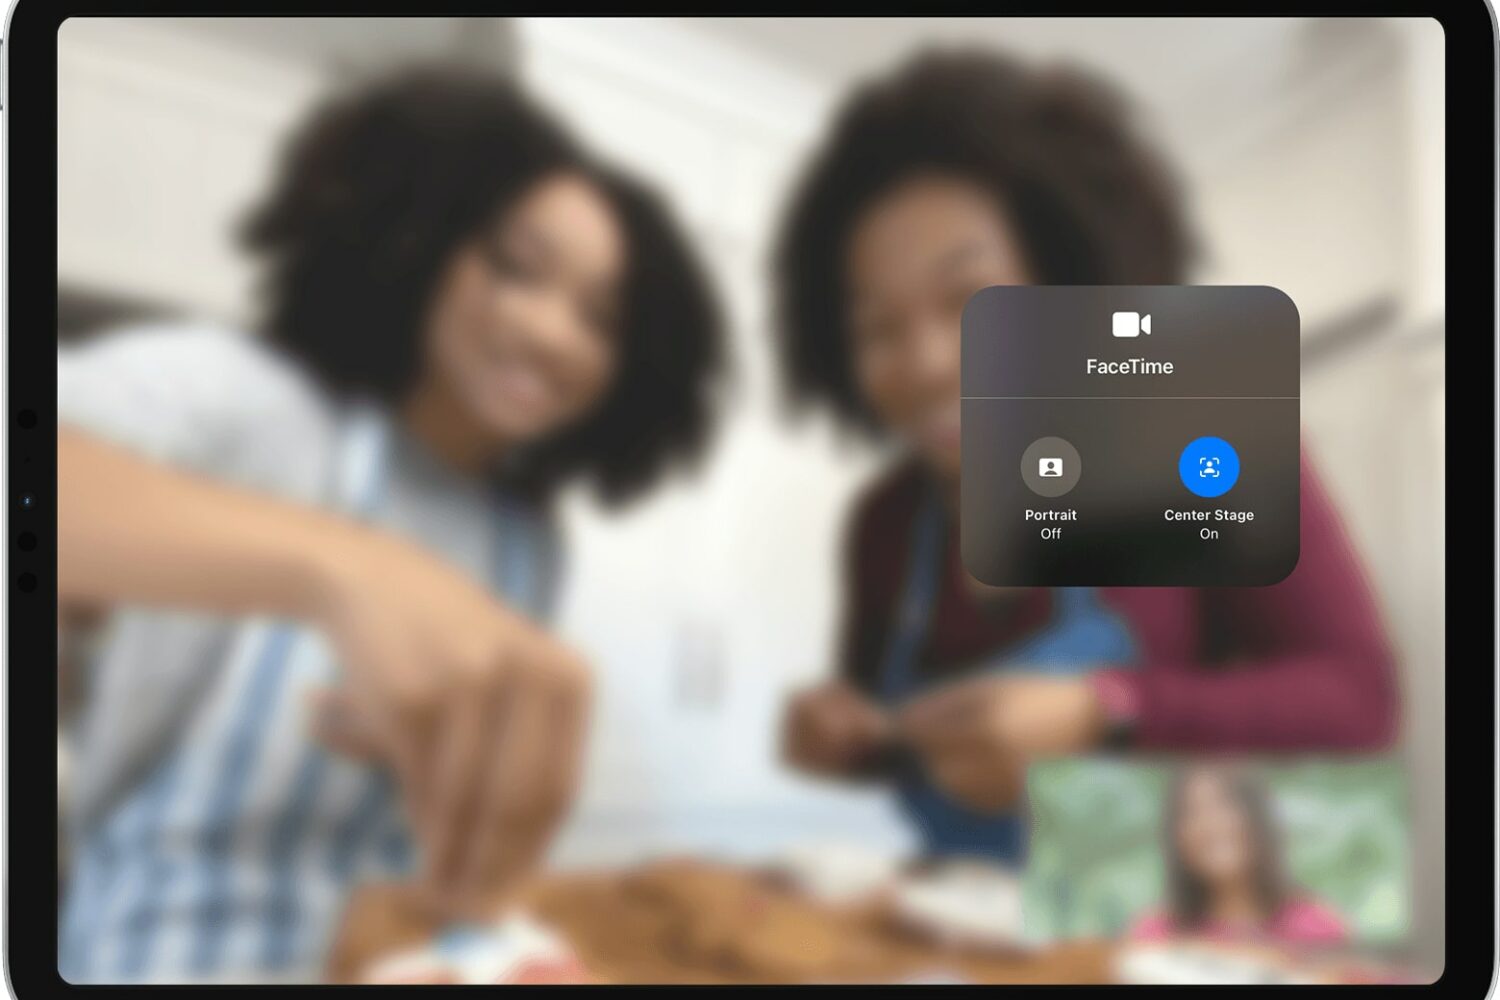 Apple's marketing image showing the iOS 15 Control Center overlay on iPad Pro with the Center Stage camera feature selected in the Video Effects menu, and a blurred FaceTime video call in the background